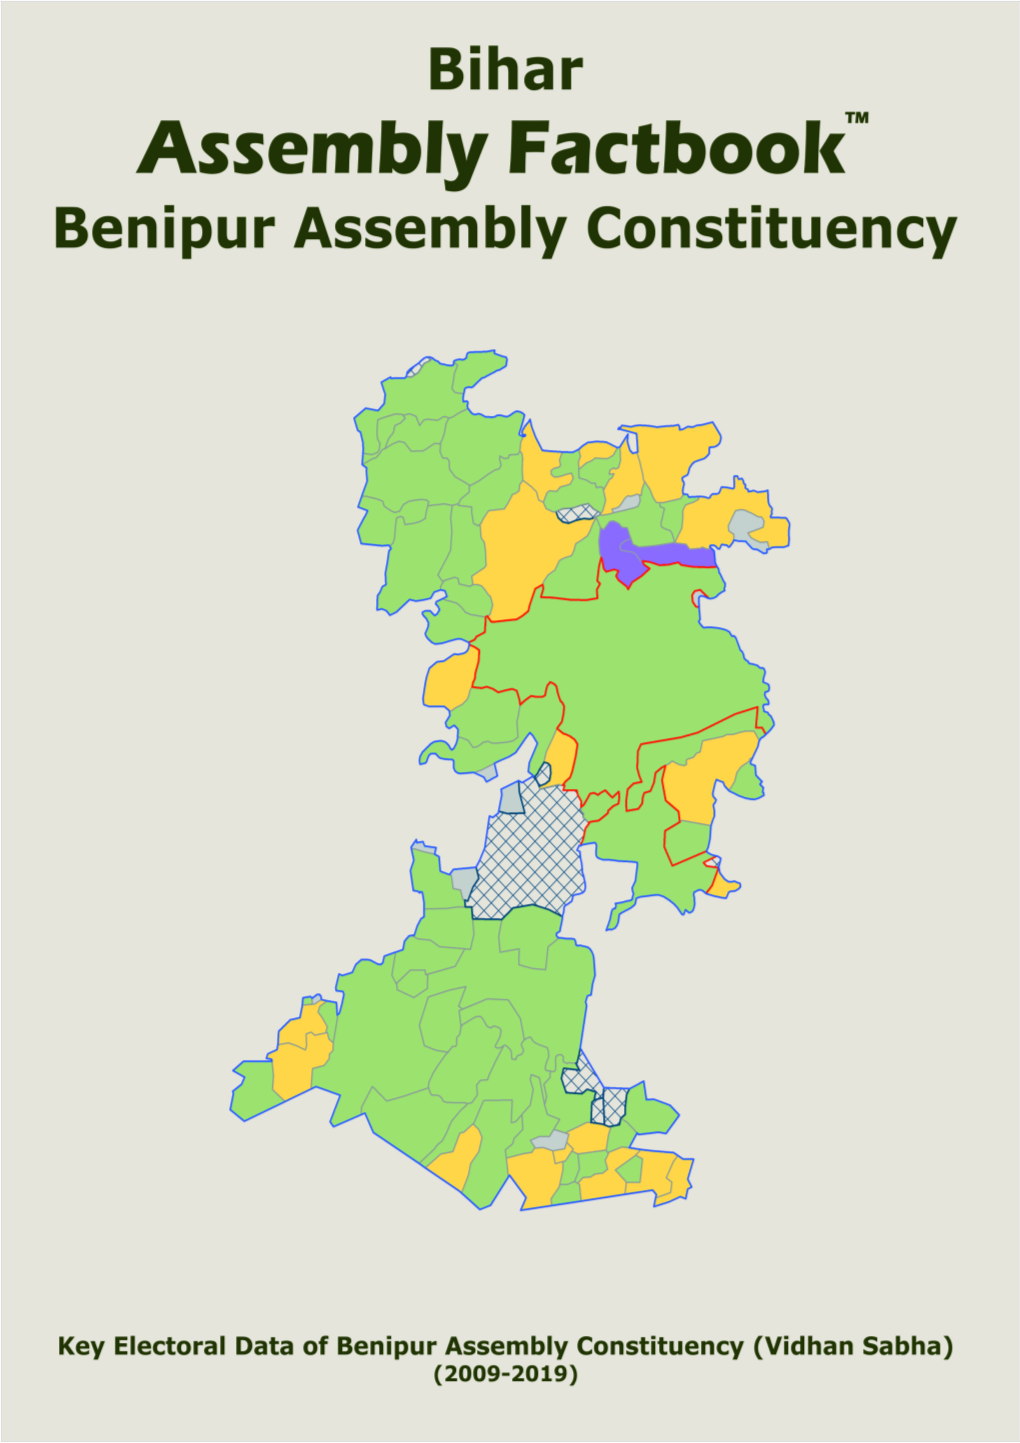 Benipur Assembly Bihar Factbook | Key Electoral Data of Benipur Assembly Constituency | Sample Book